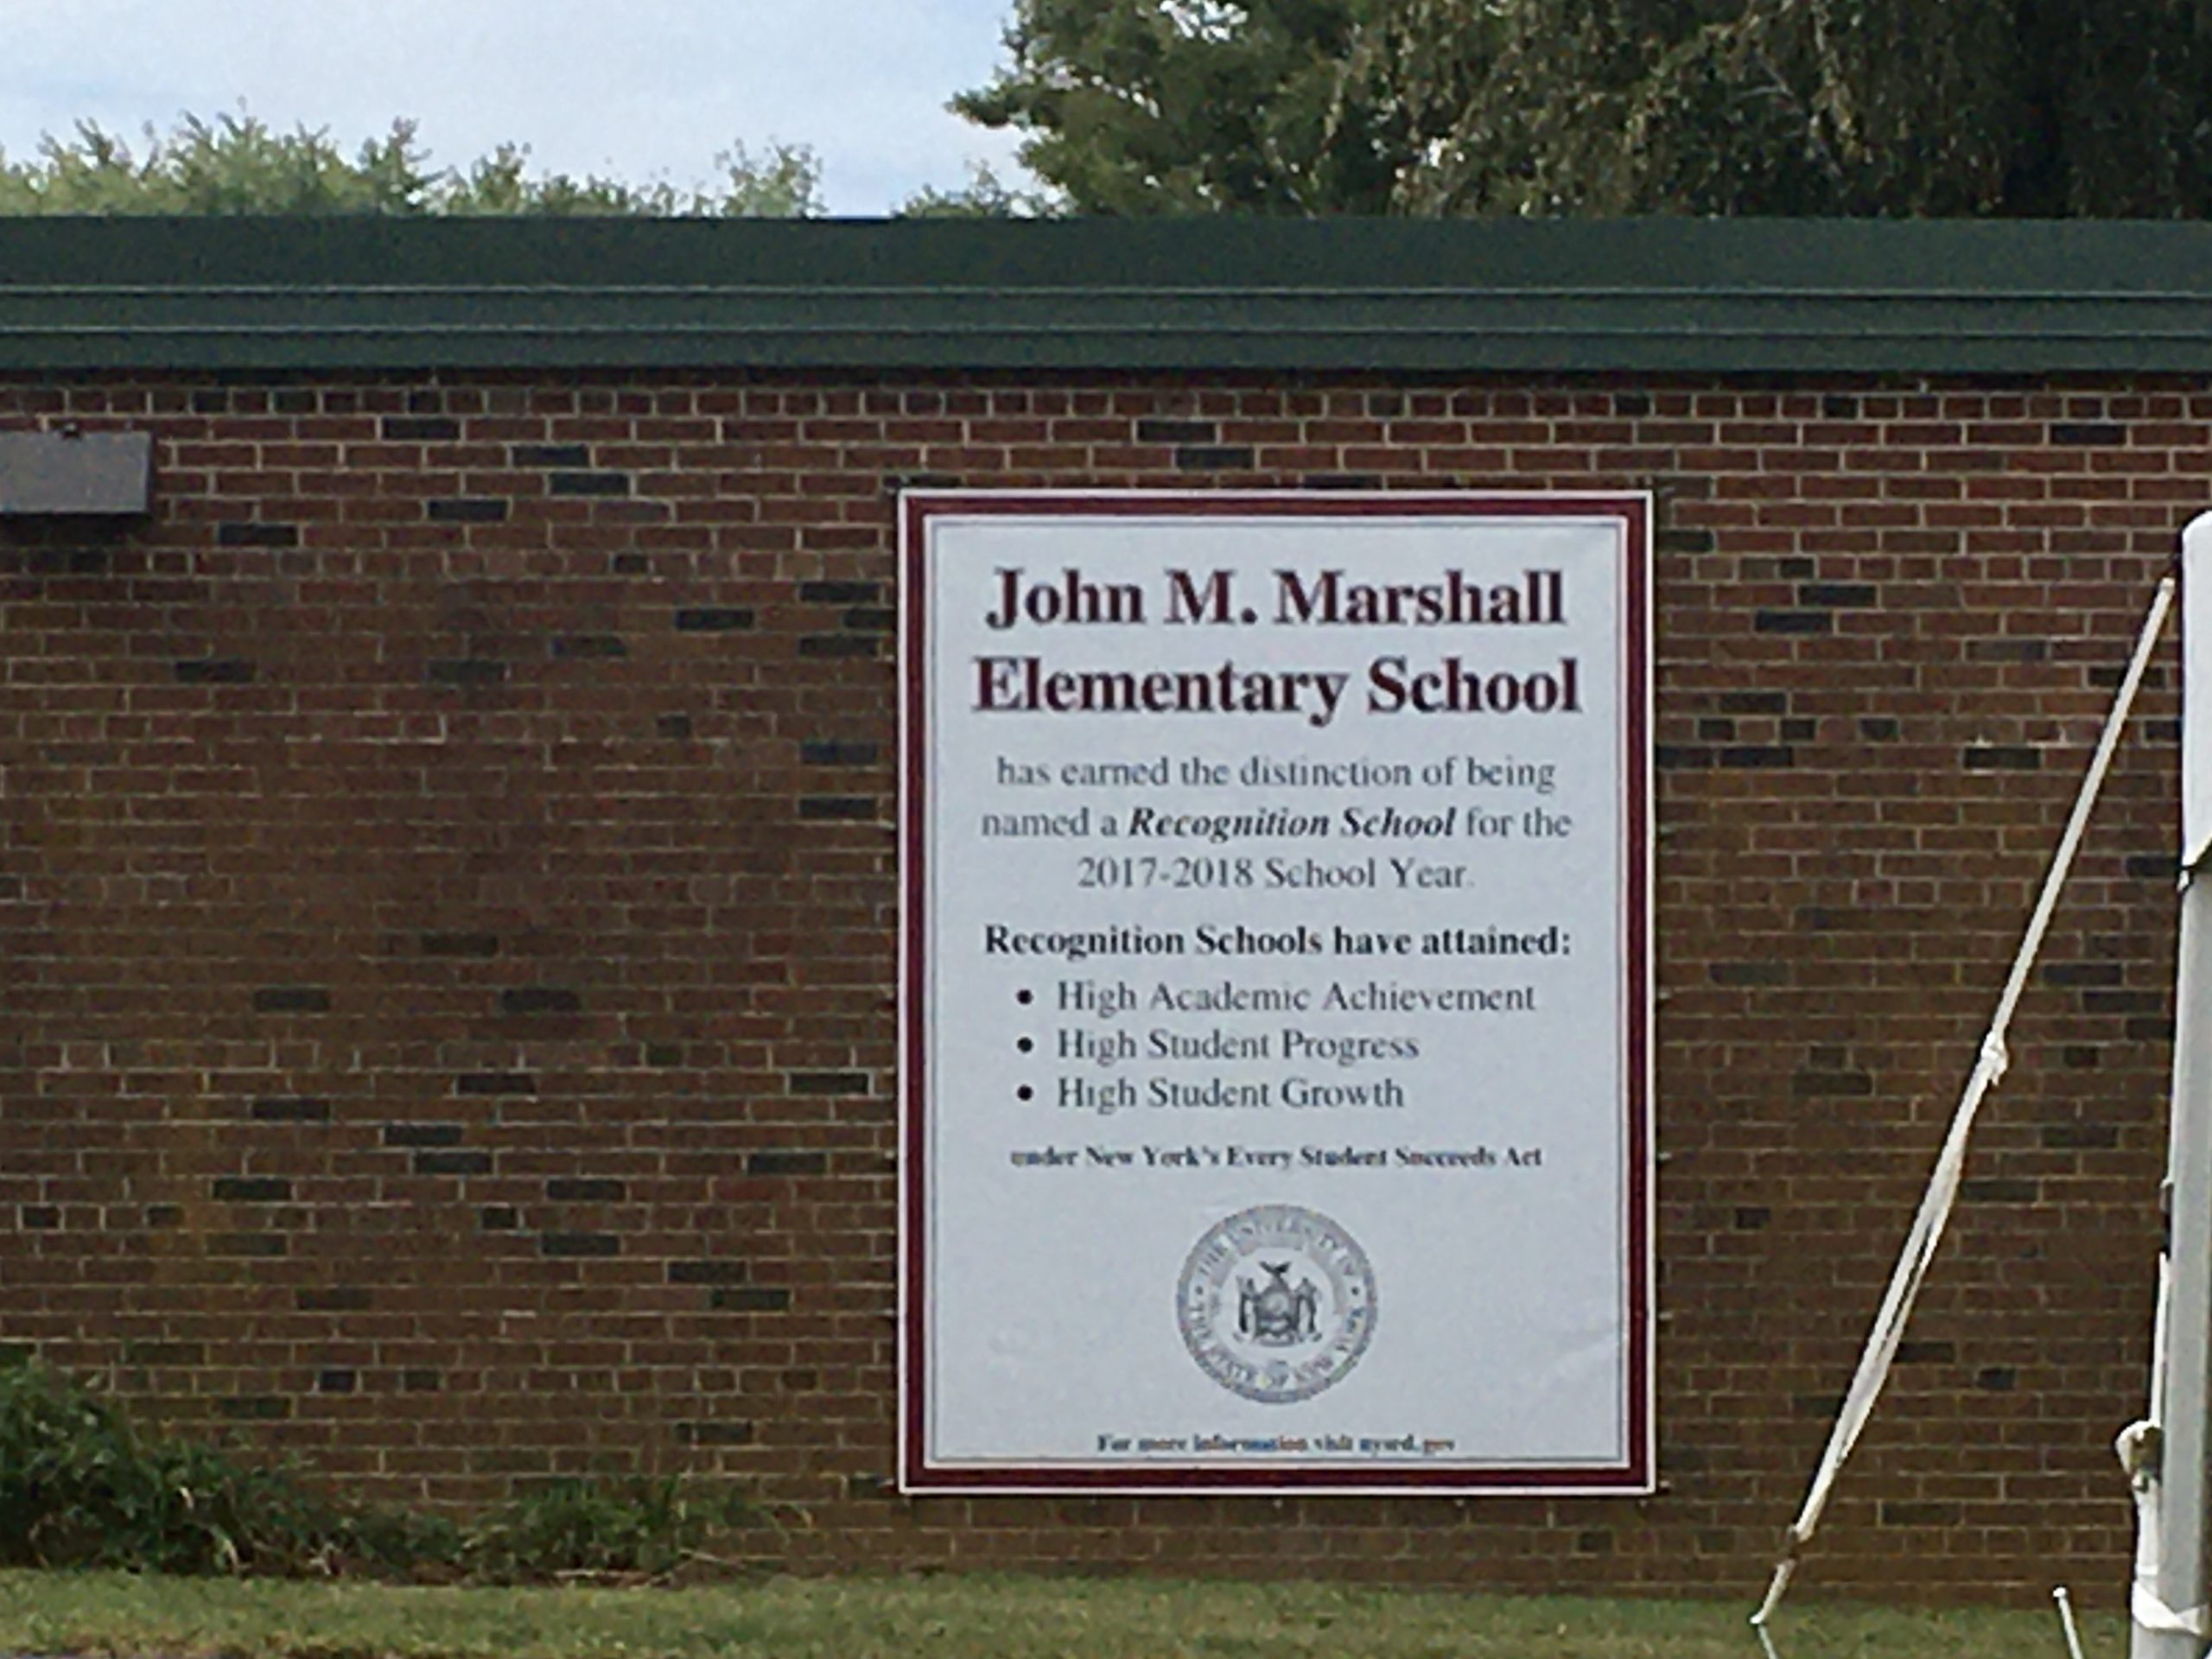 A student at John M. Marshall Elementary School has tested positive for COVID-19.